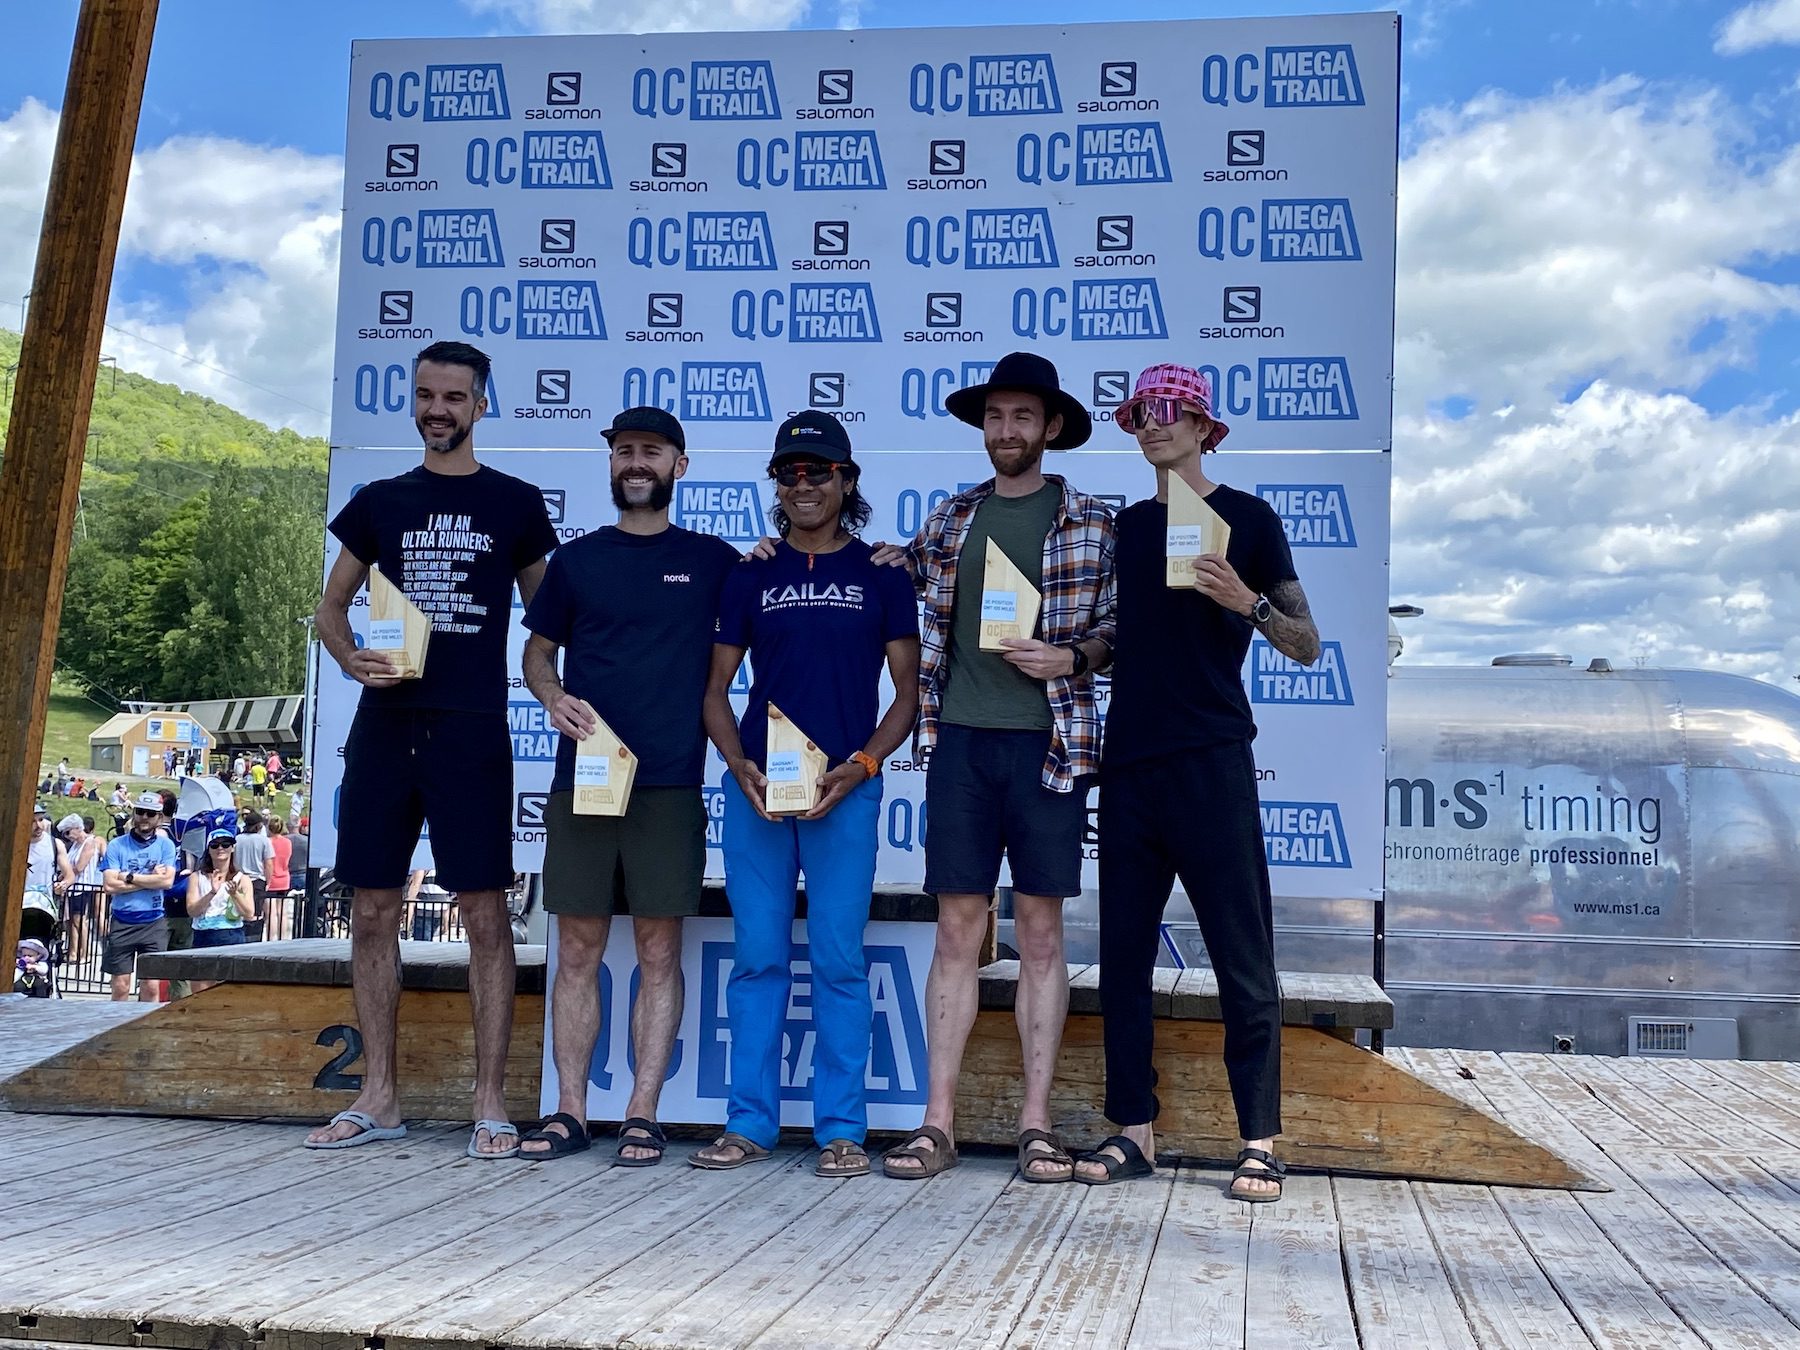 Quebec Mega Trail 100miles Sangé Sherpa sets new course record with